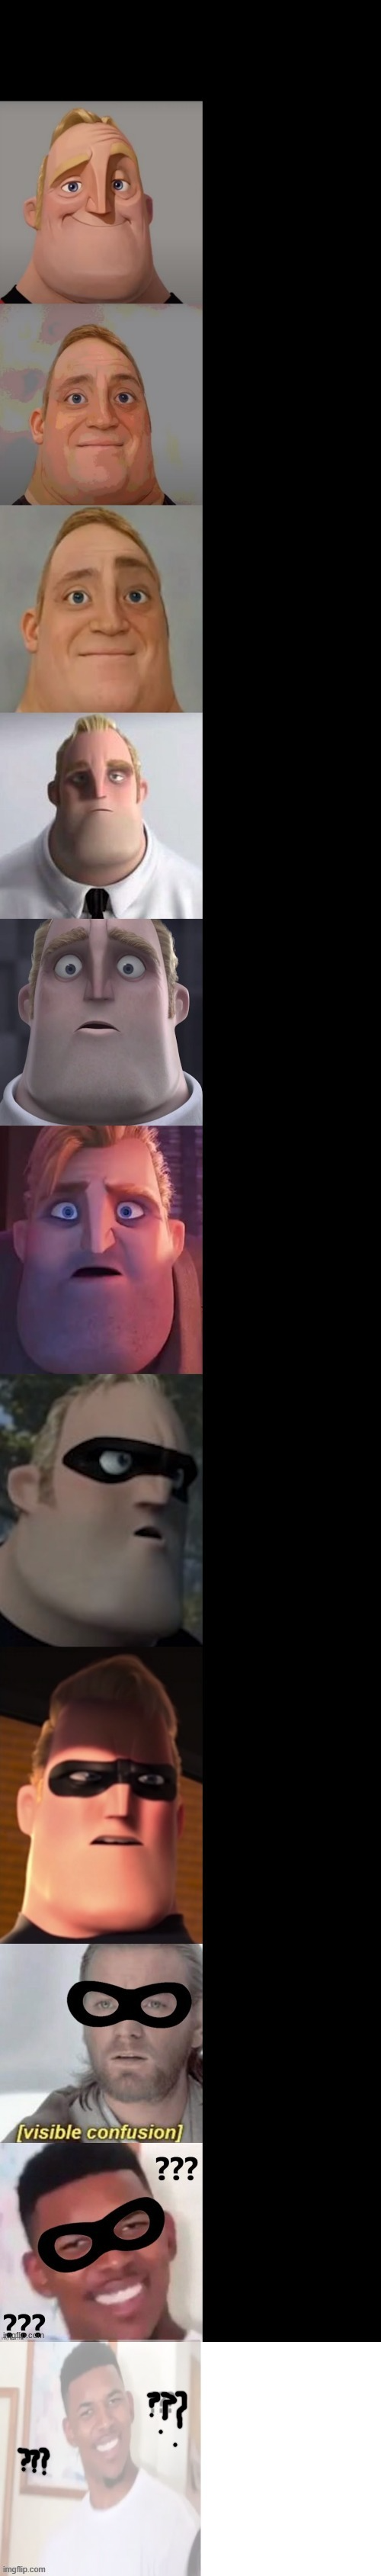 High Quality Mr Incredible becoming confused Extended Blank Meme Template